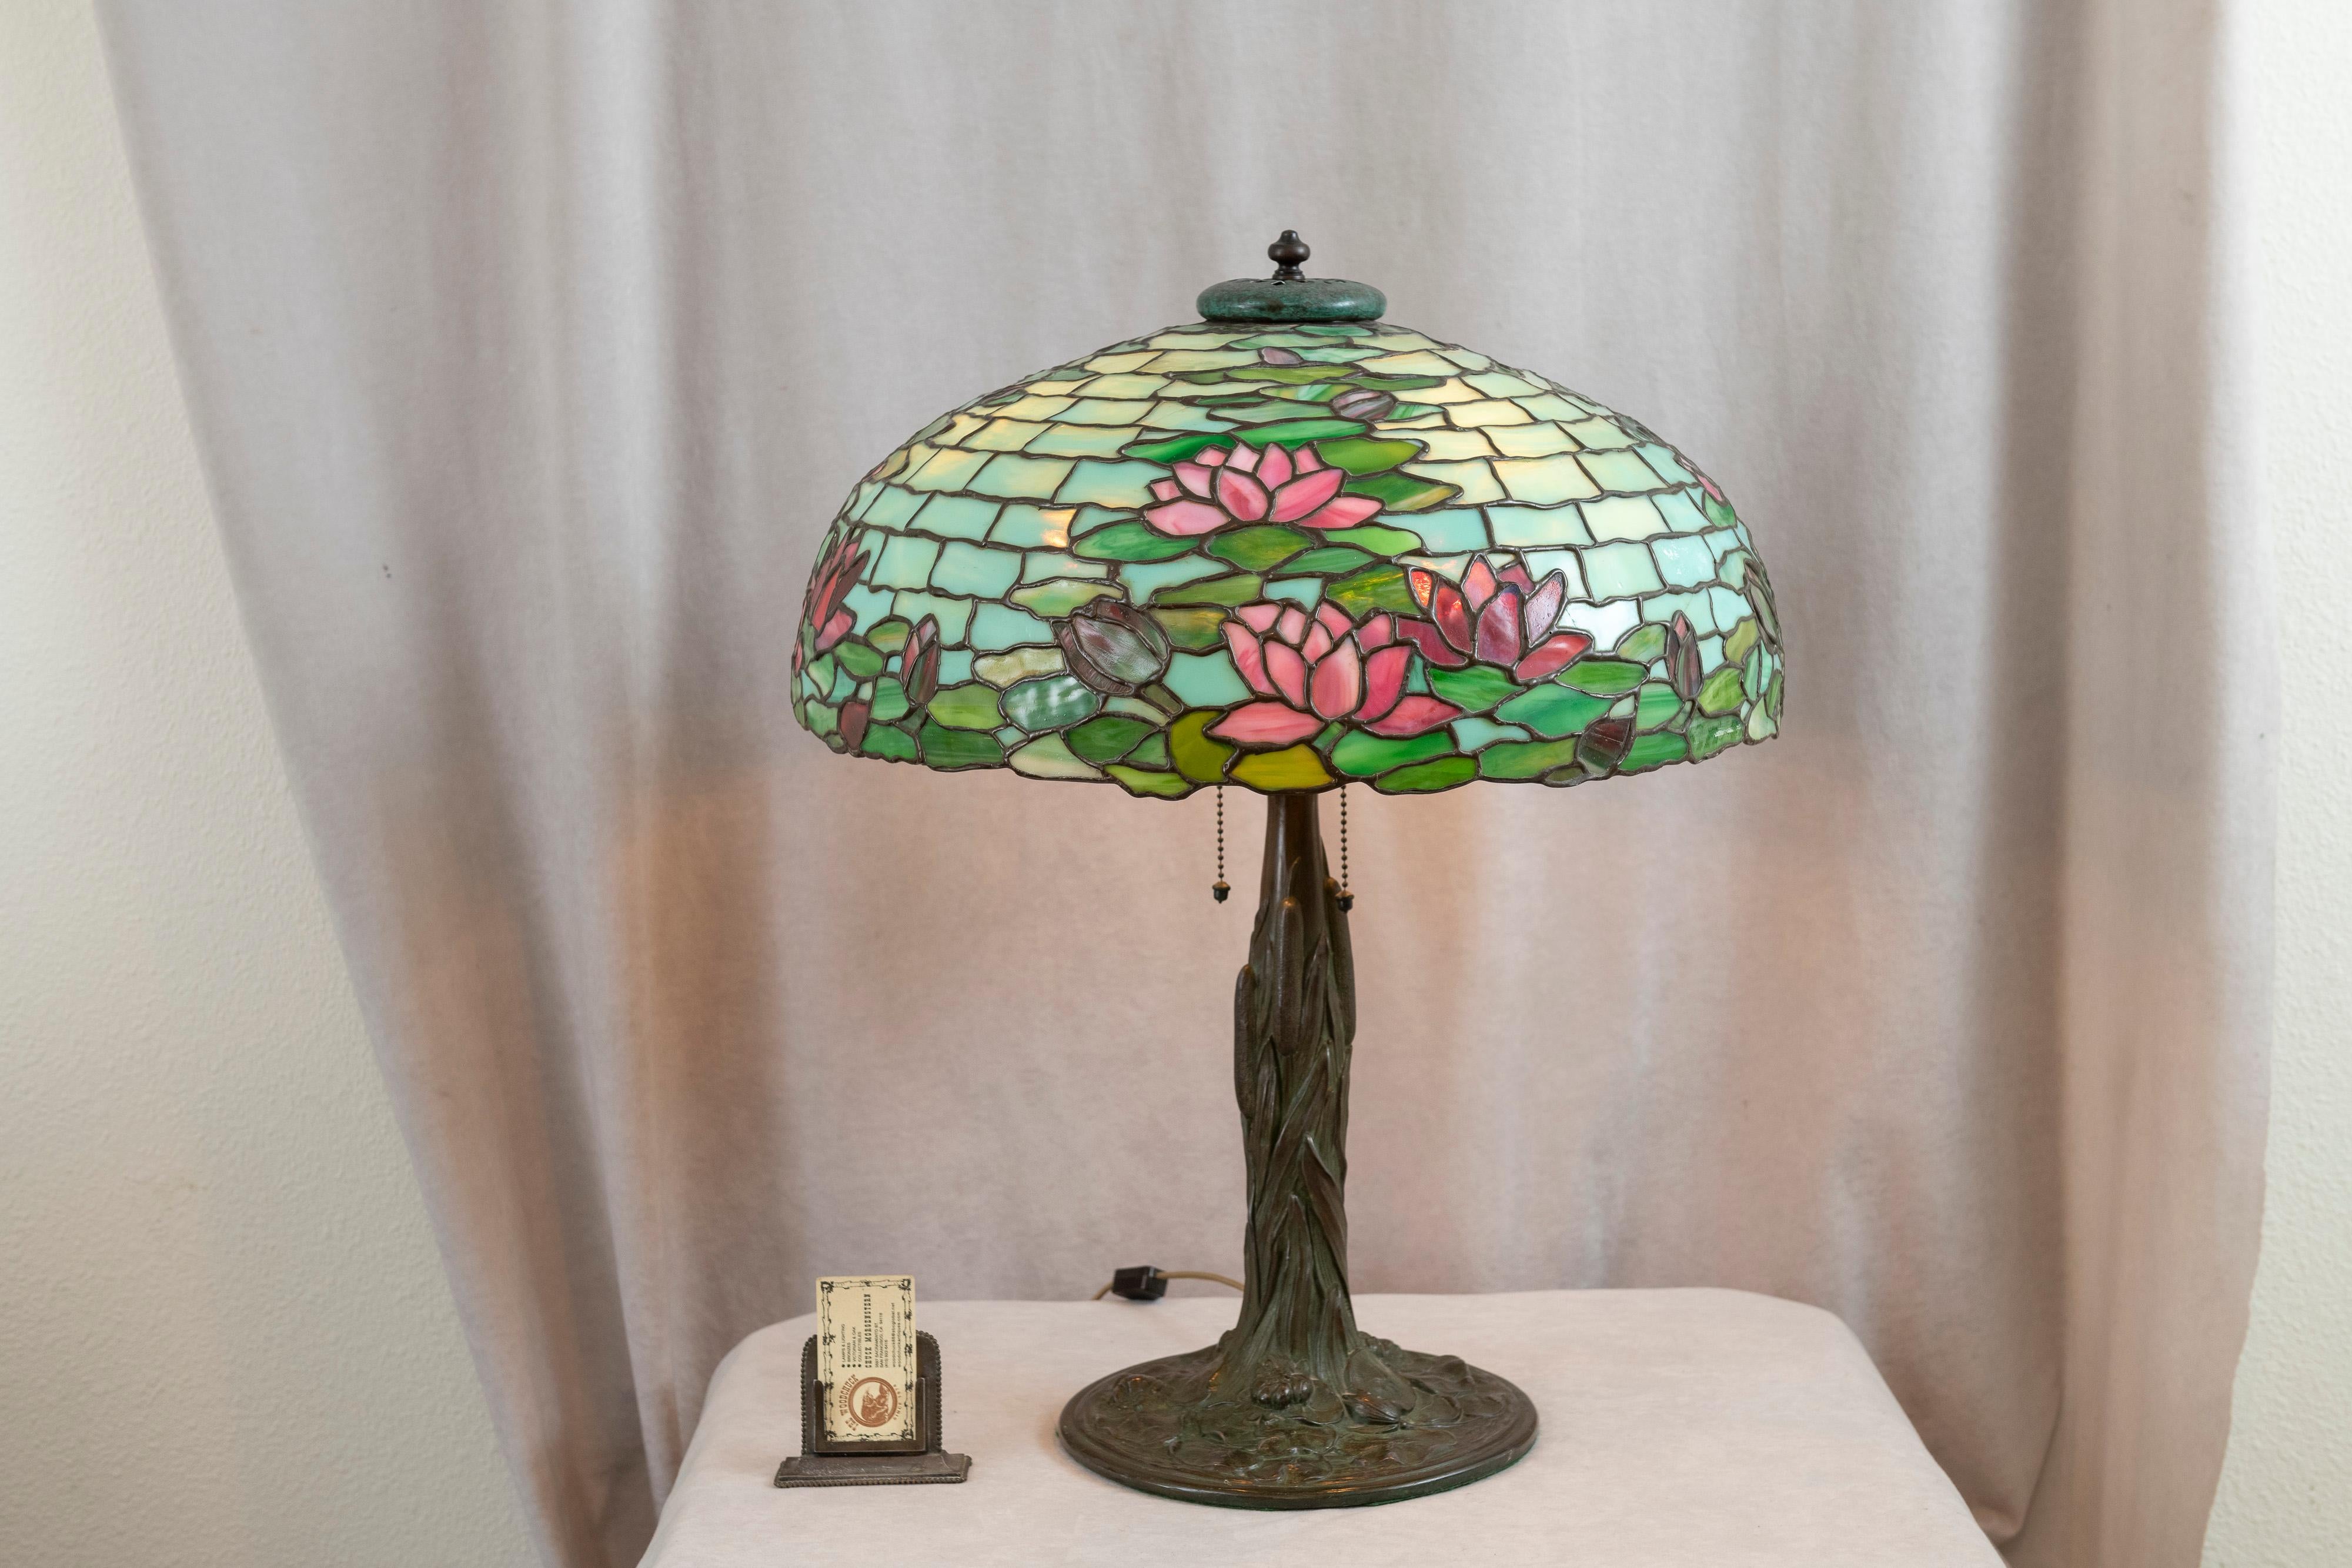 This very high quality leaded glass lamp was manufactured by the noted company Duffner & Kimberly. Those who get interested in leaded glass table lamps from the early 20th century will undoubtedly learn how important this company was to this genre